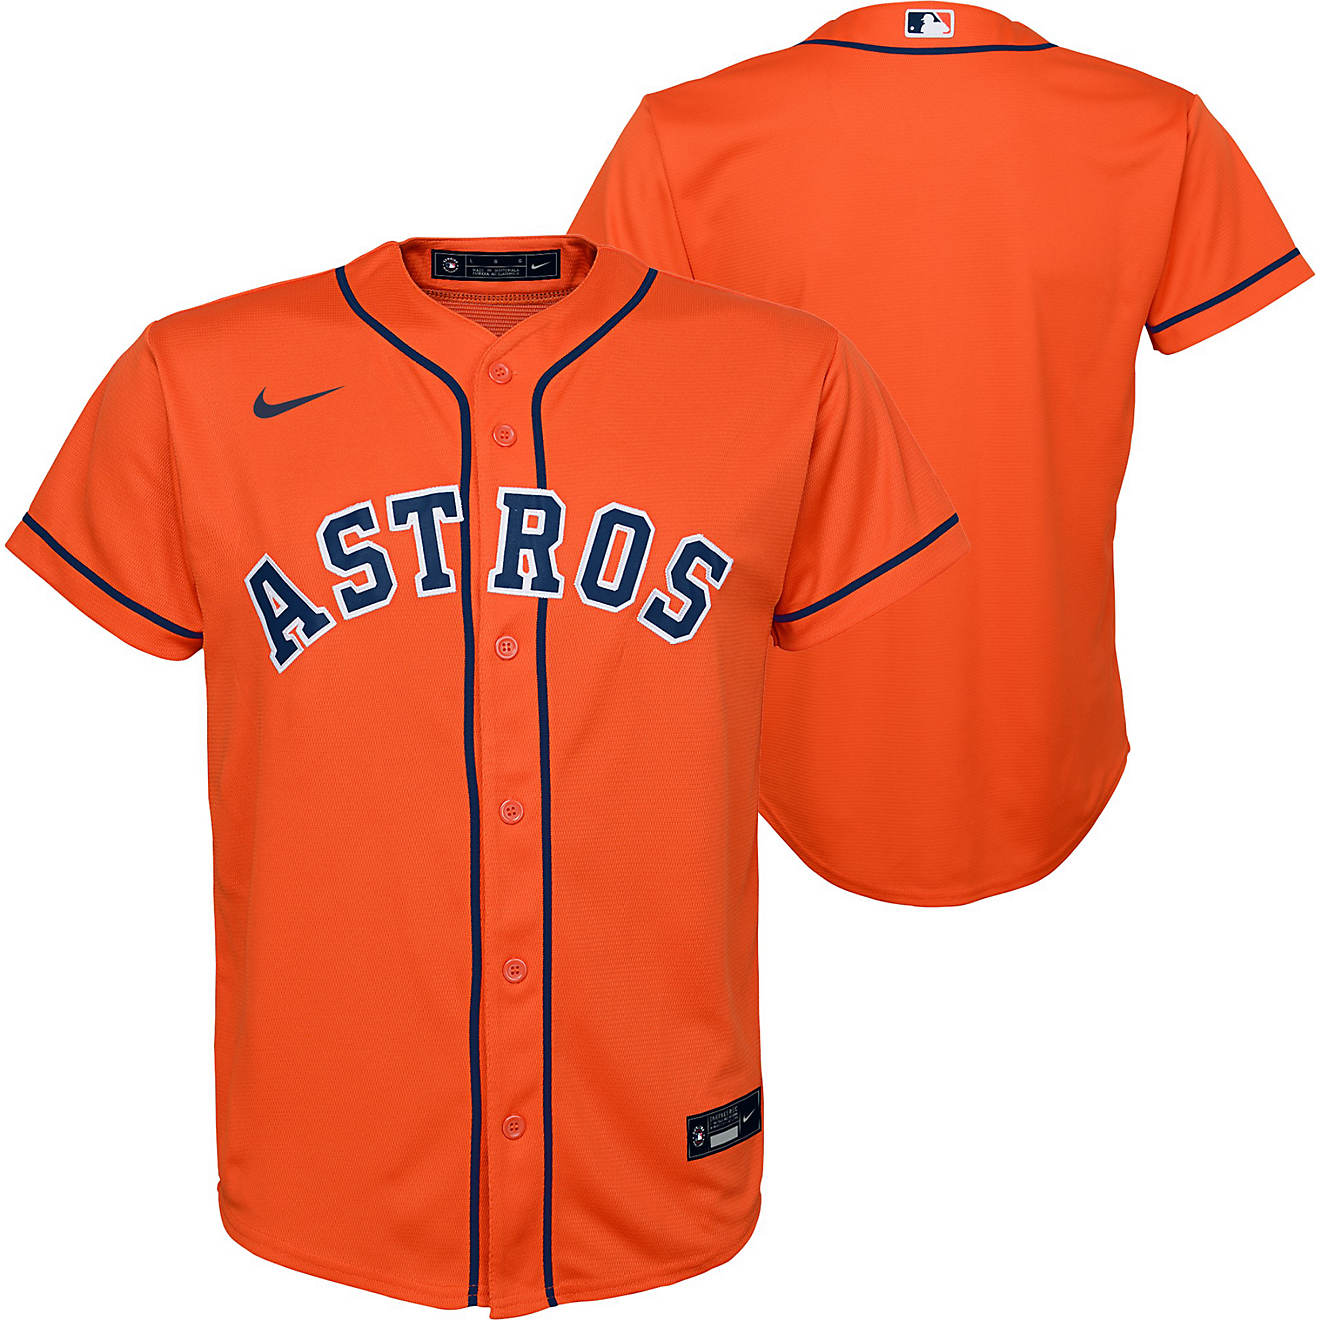 Nike Youth Houston Astros Replica Finished Jersey | Academy